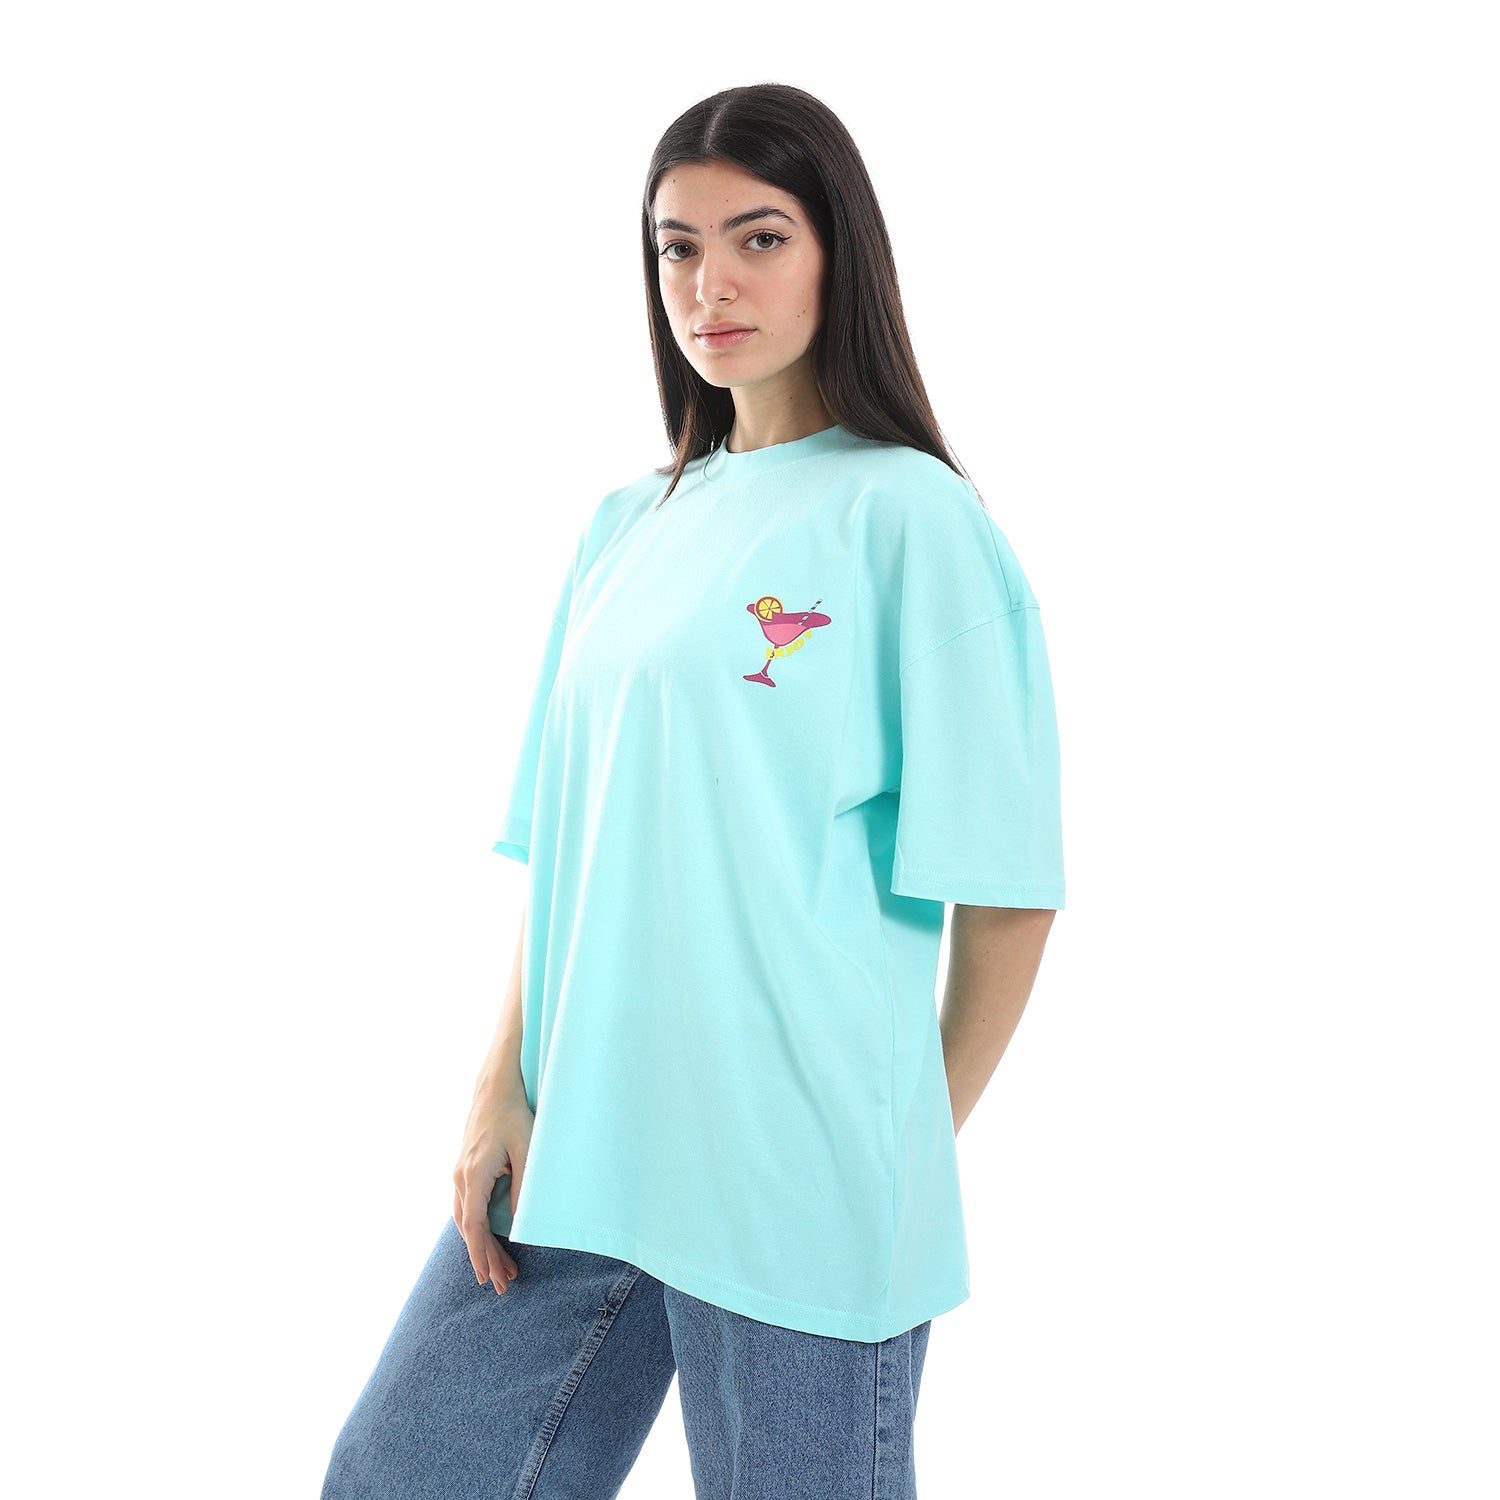 Party In Mind Unisex Oversized SS T-Shirt - Sky Blue